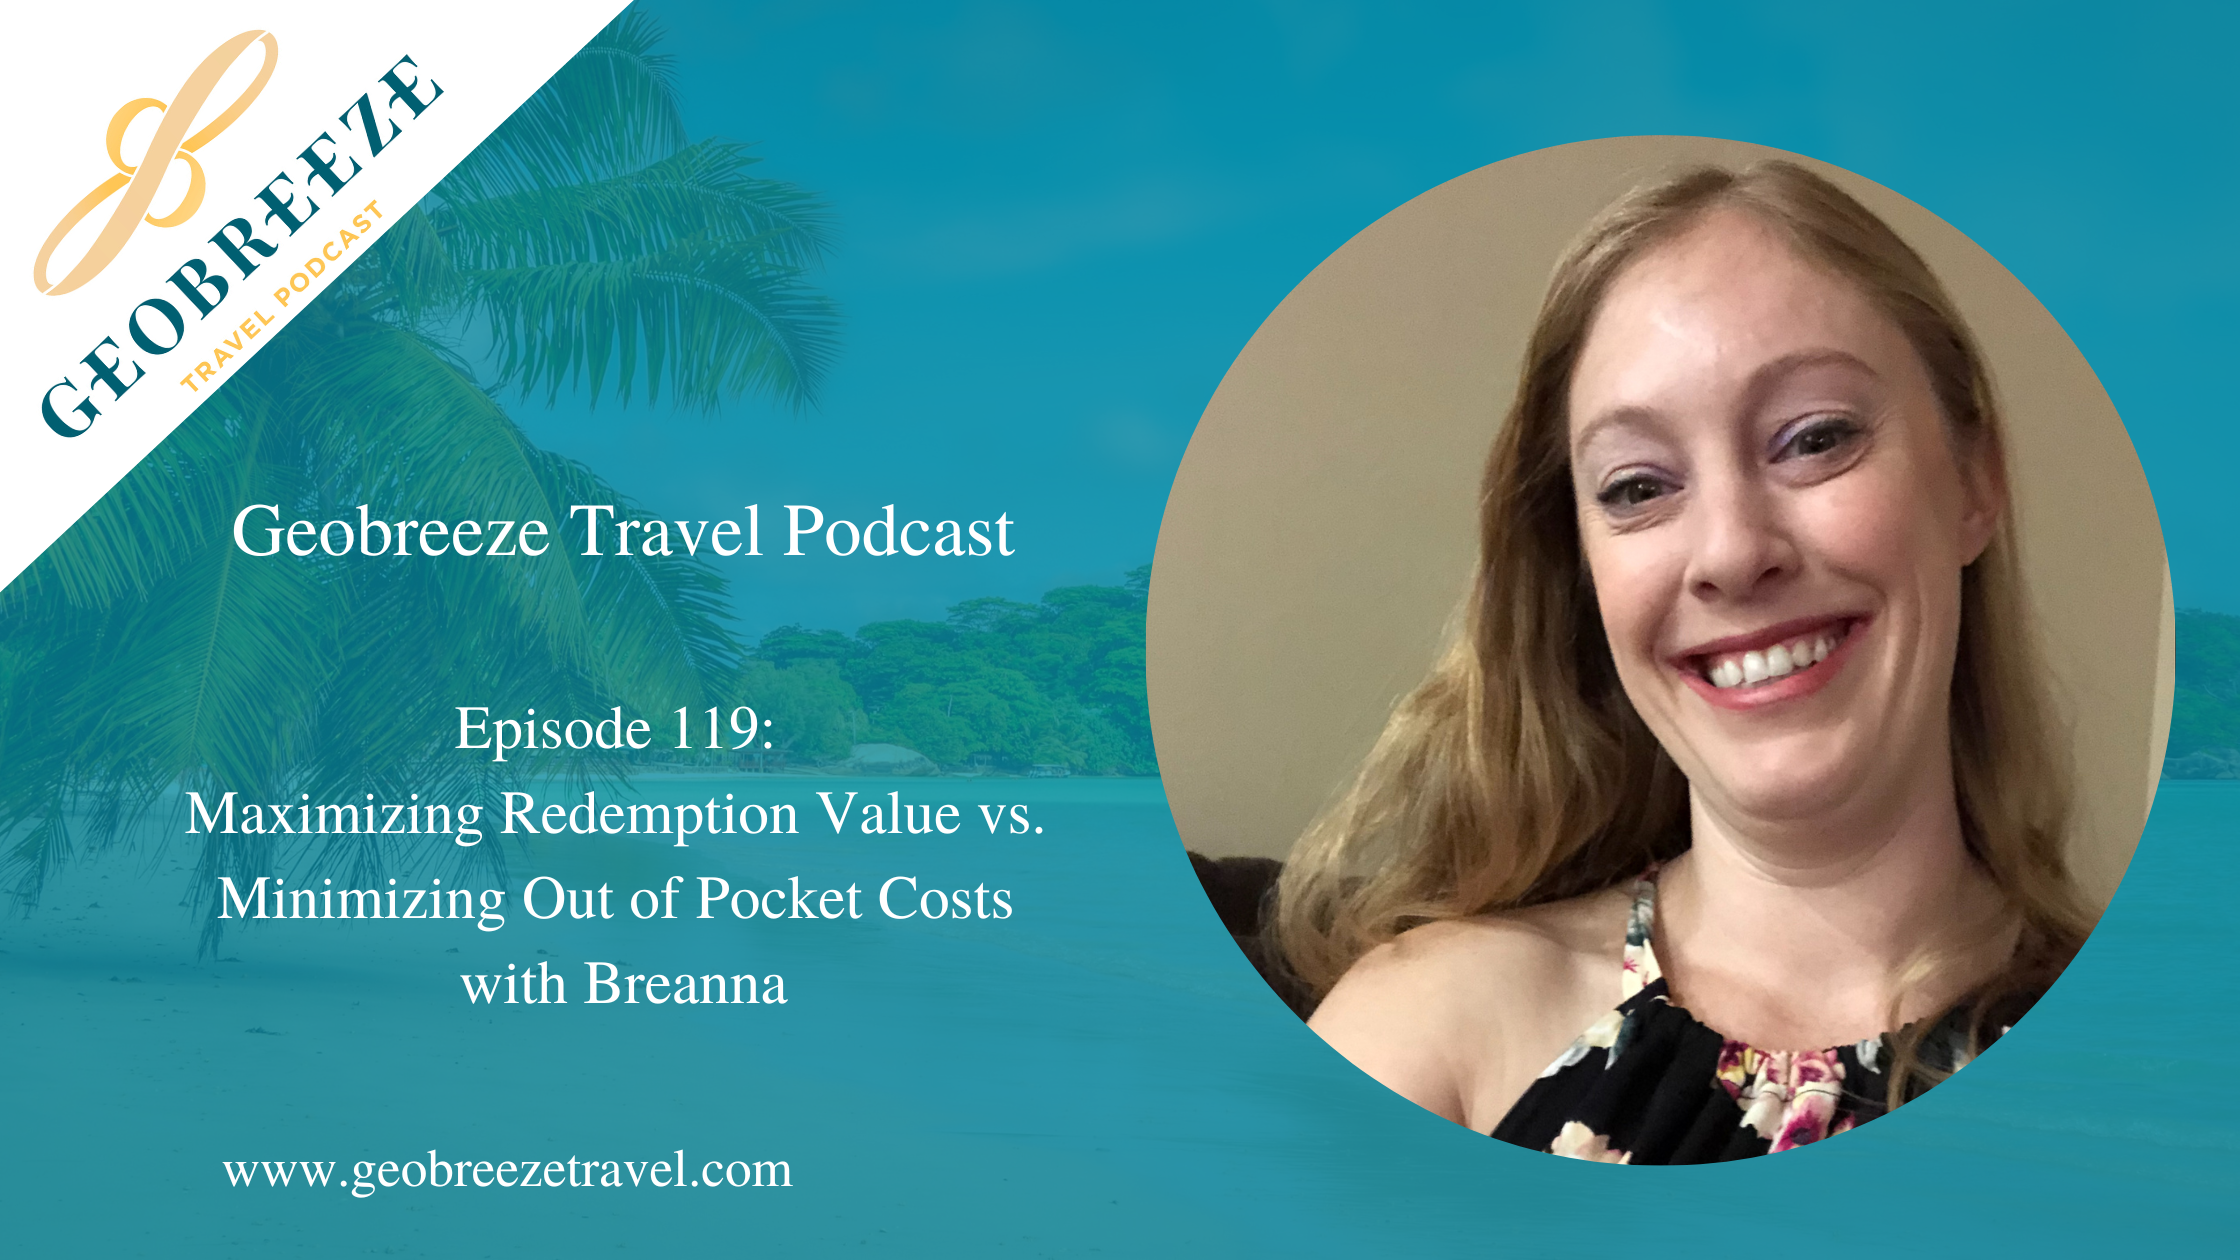 Episode 119: Maximizing Redemption Value vs. Minimizing Out of Pocket Costs with Breanna